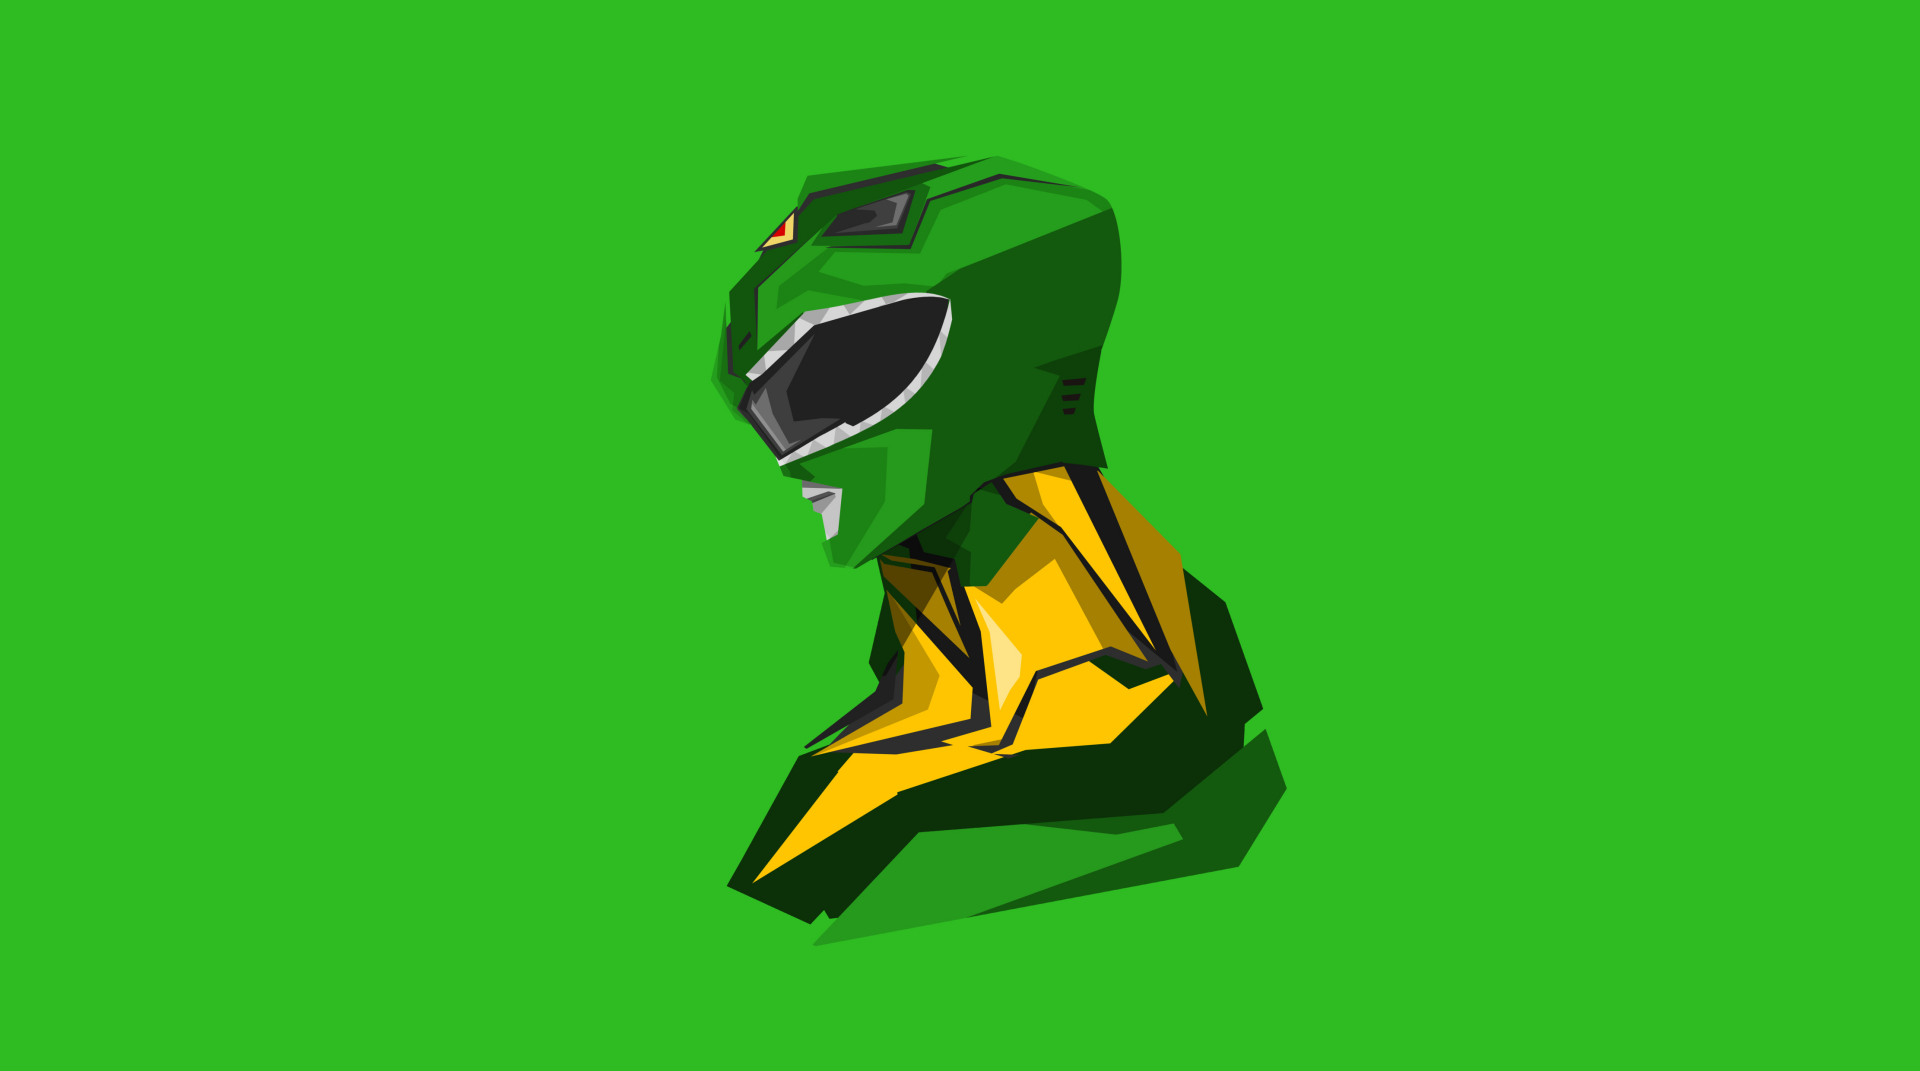 Green Ranger wallpaper by Inferno12121  Download on ZEDGE  134c